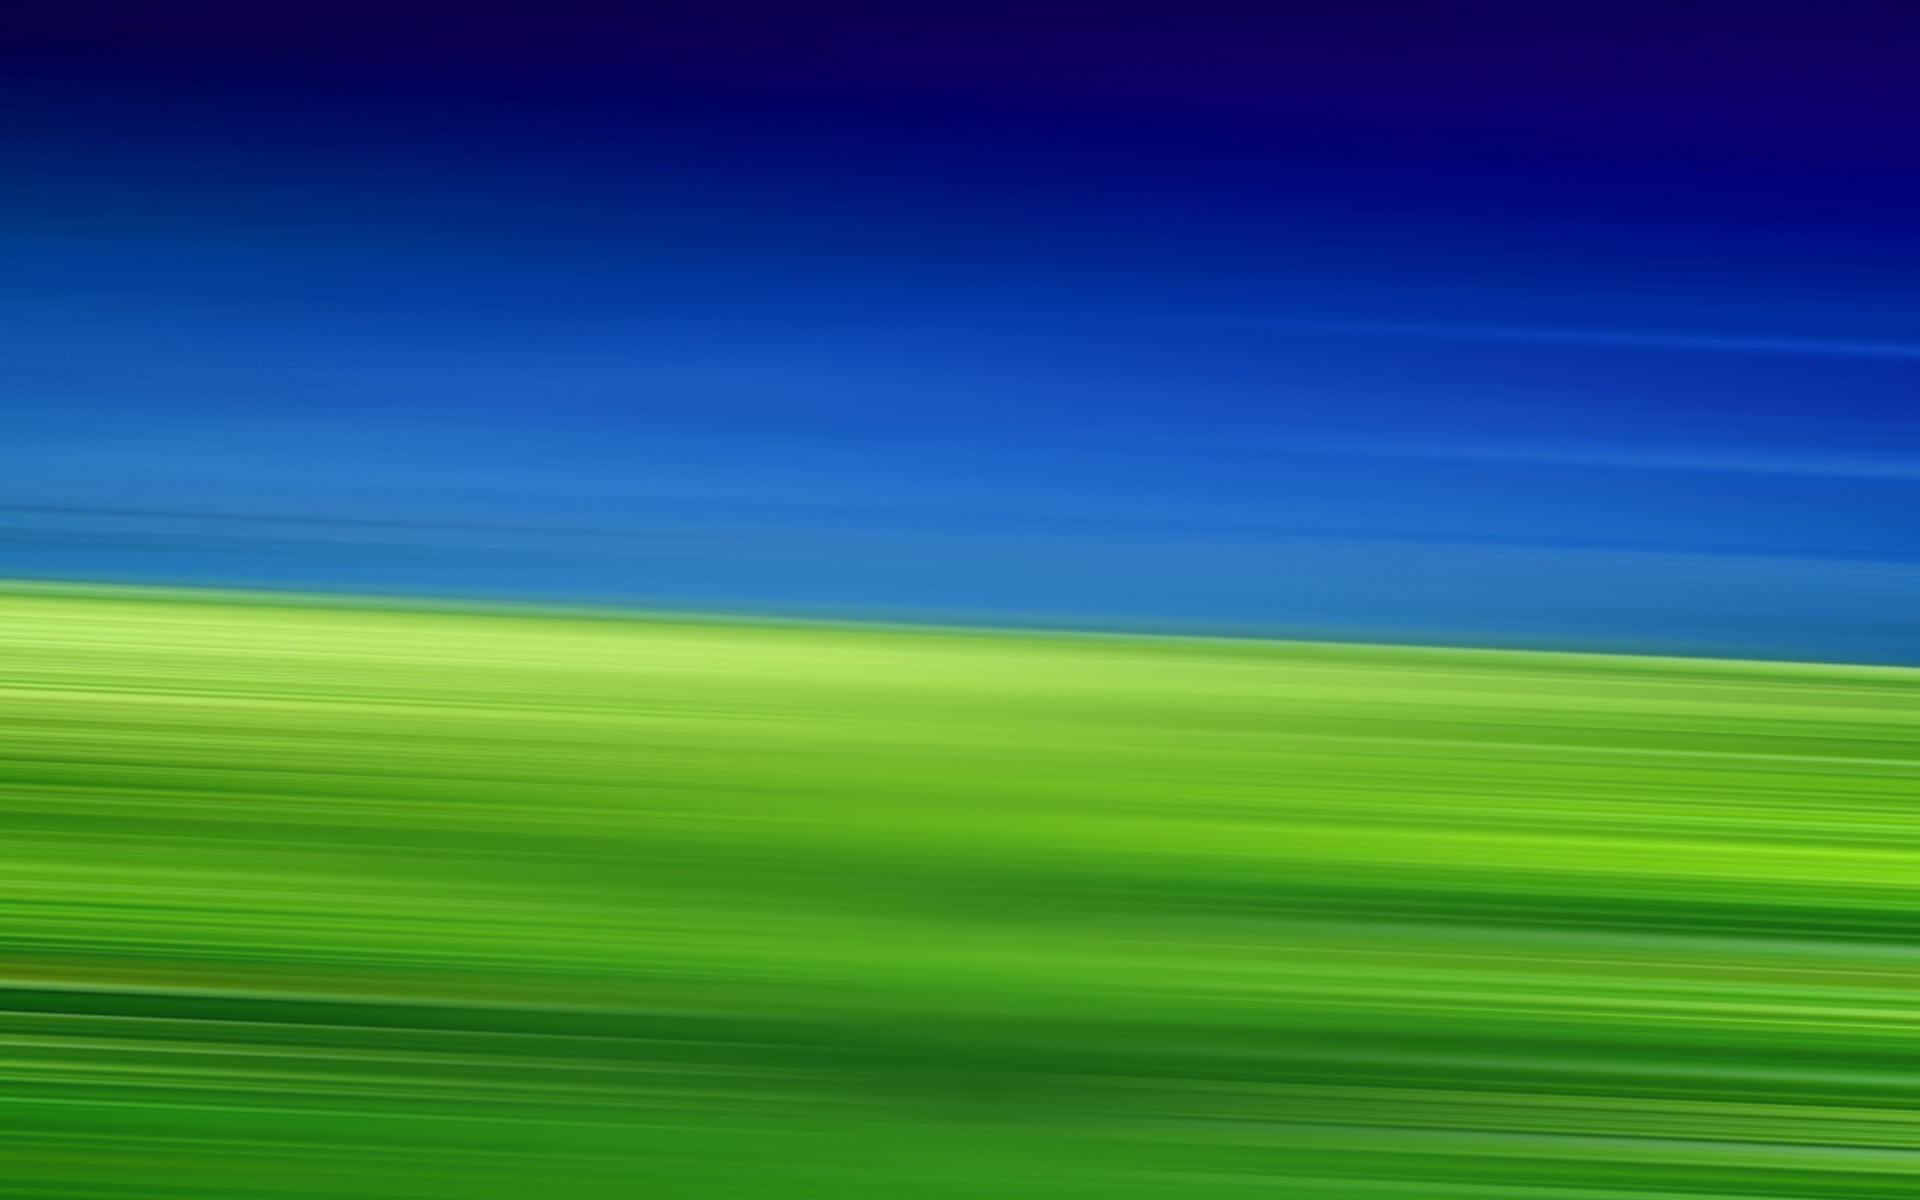 1920x1200 Blue And Green wallpaper